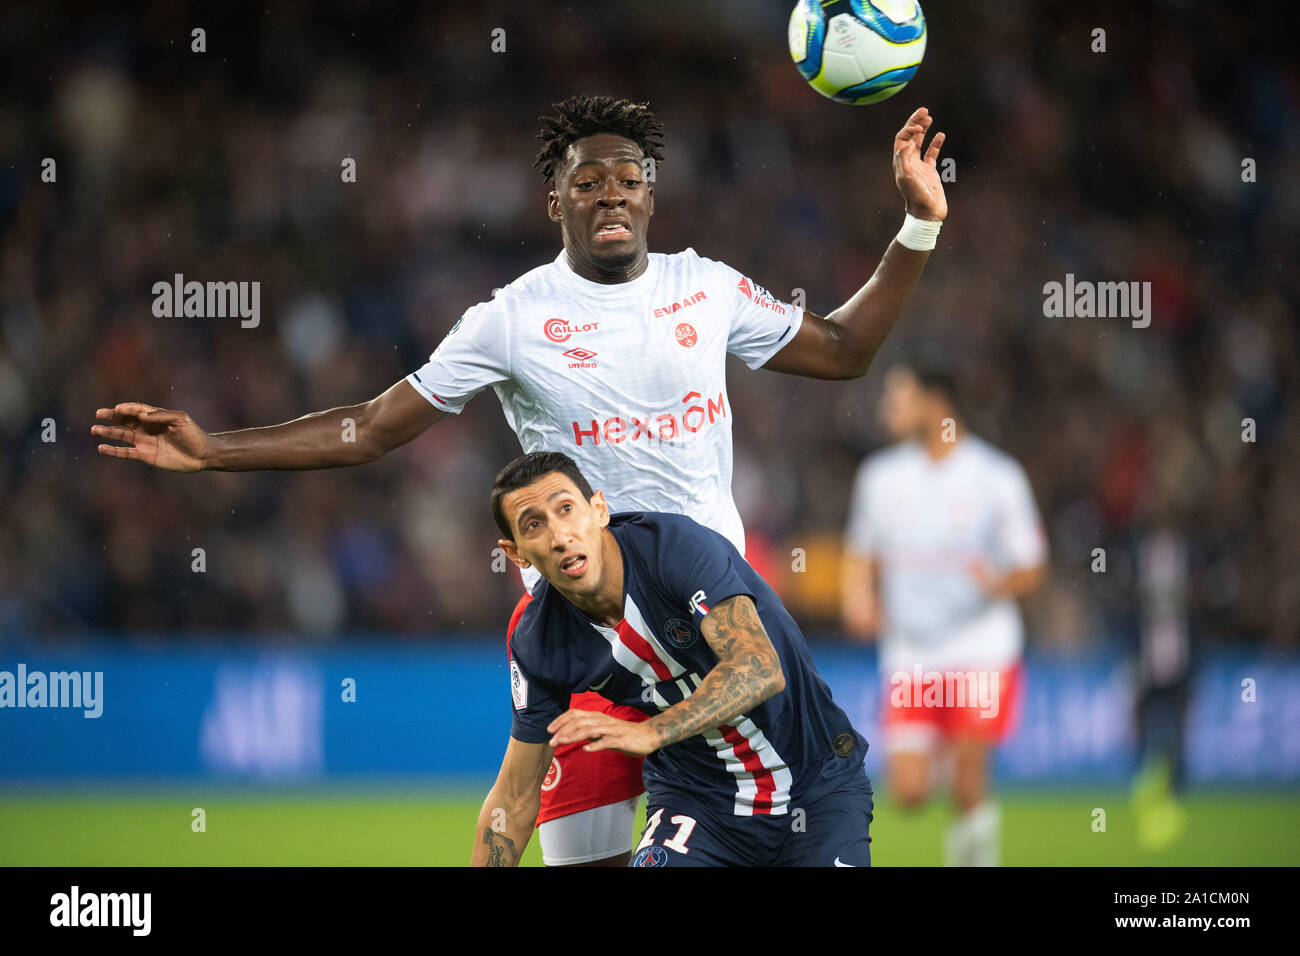 Paris. 25th Sep, 2019. Angel Di Maria (front) of Paris Saint-Germain competes with Axel Disasi of Reims during their 2019-2020 season French Ligue 1 match in Paris, France on Sept. 25, 2019. Credit: Jack Chan/Xinhua/Alamy Live News Stock Photo